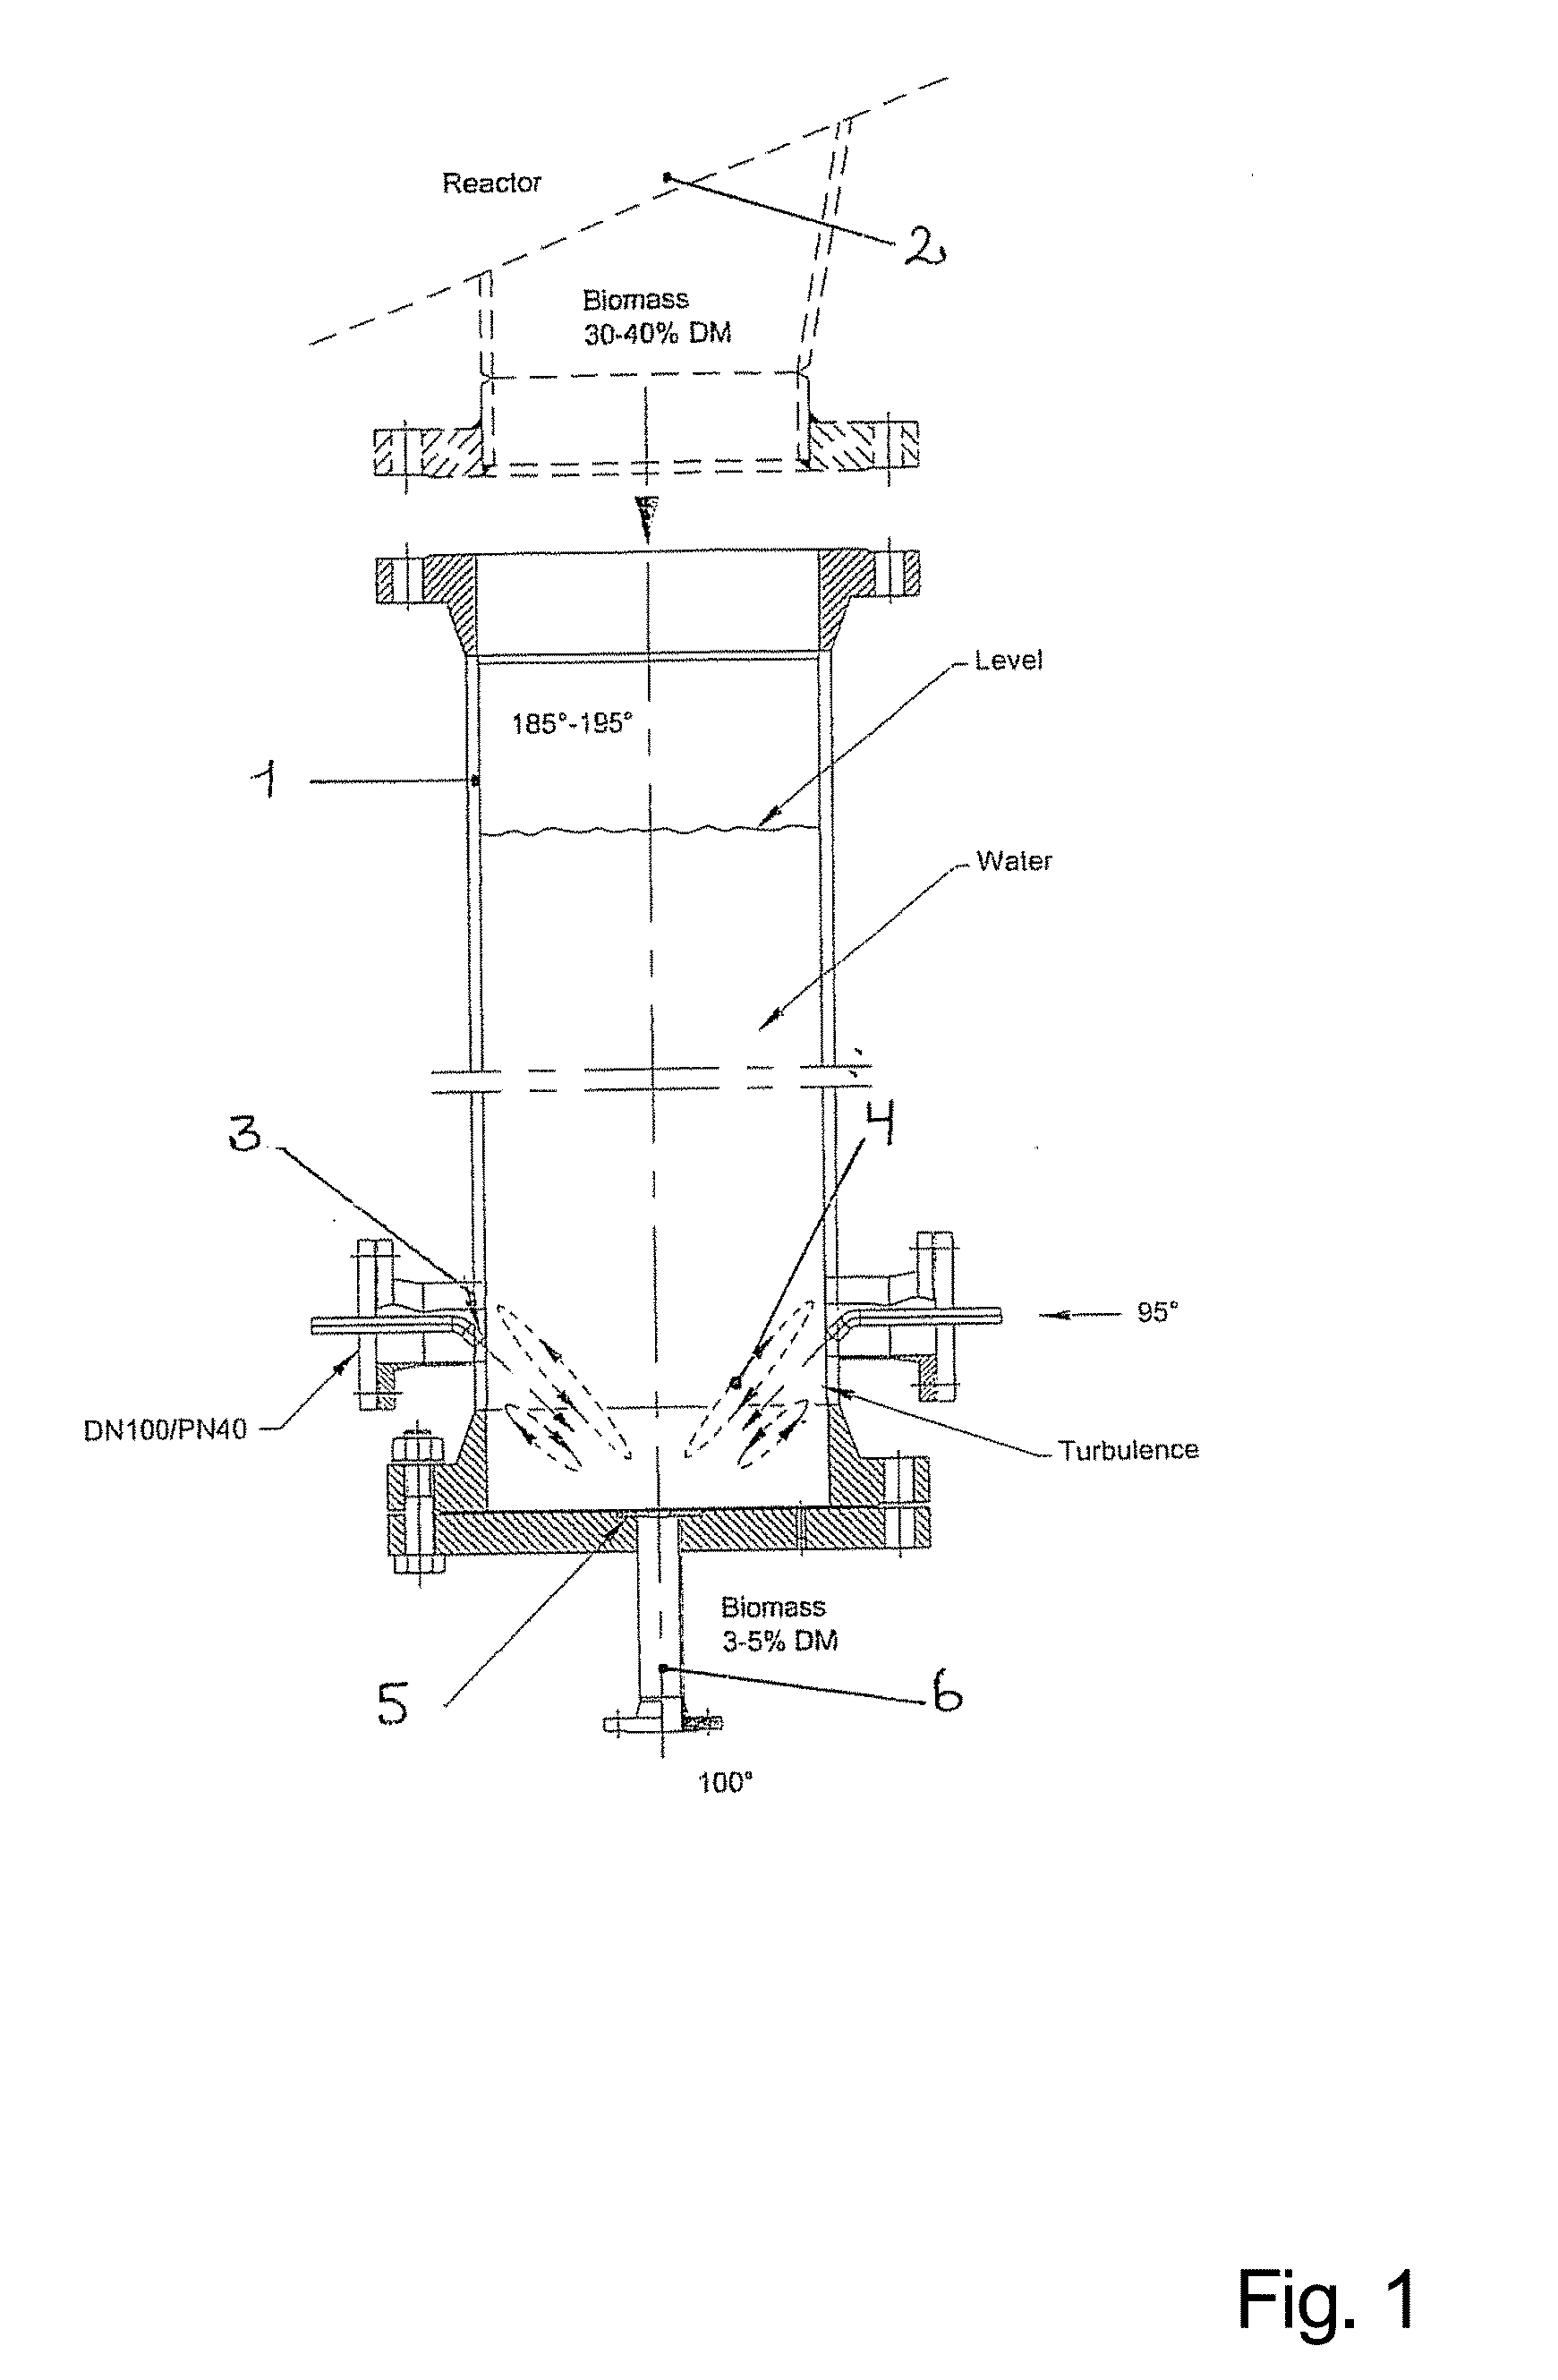 Improved device for discharging pretreated biomass from higher to lower pressure regions